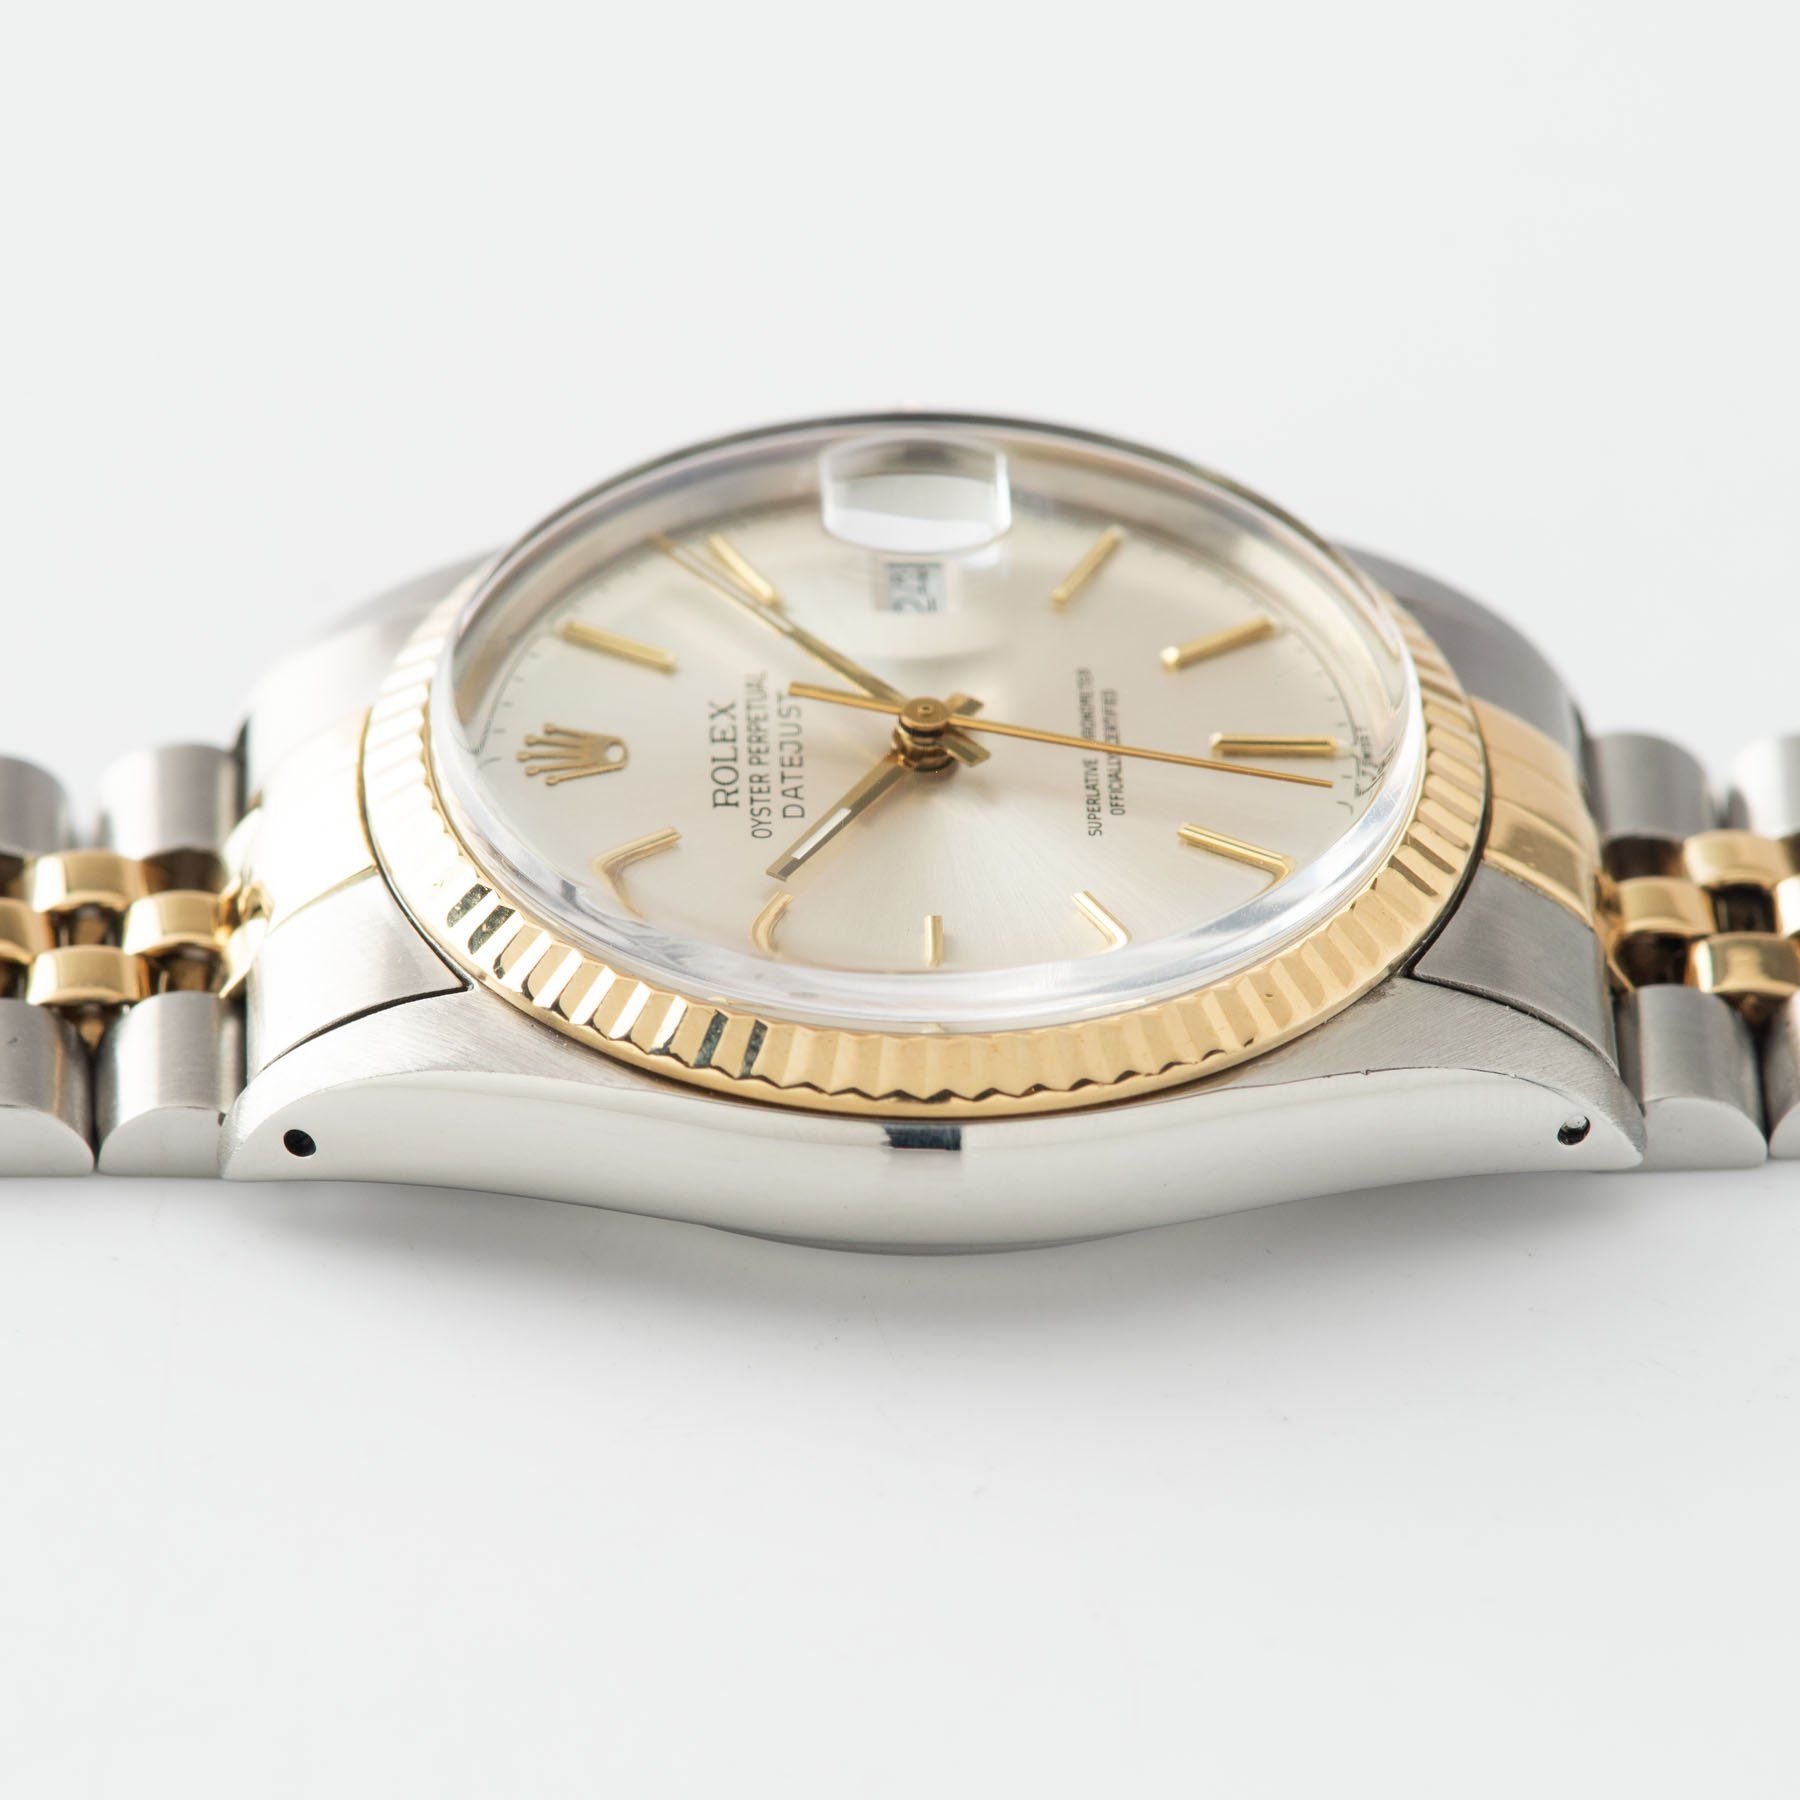 Rolex Datejust Steel and Gold 16013 Silver Dial